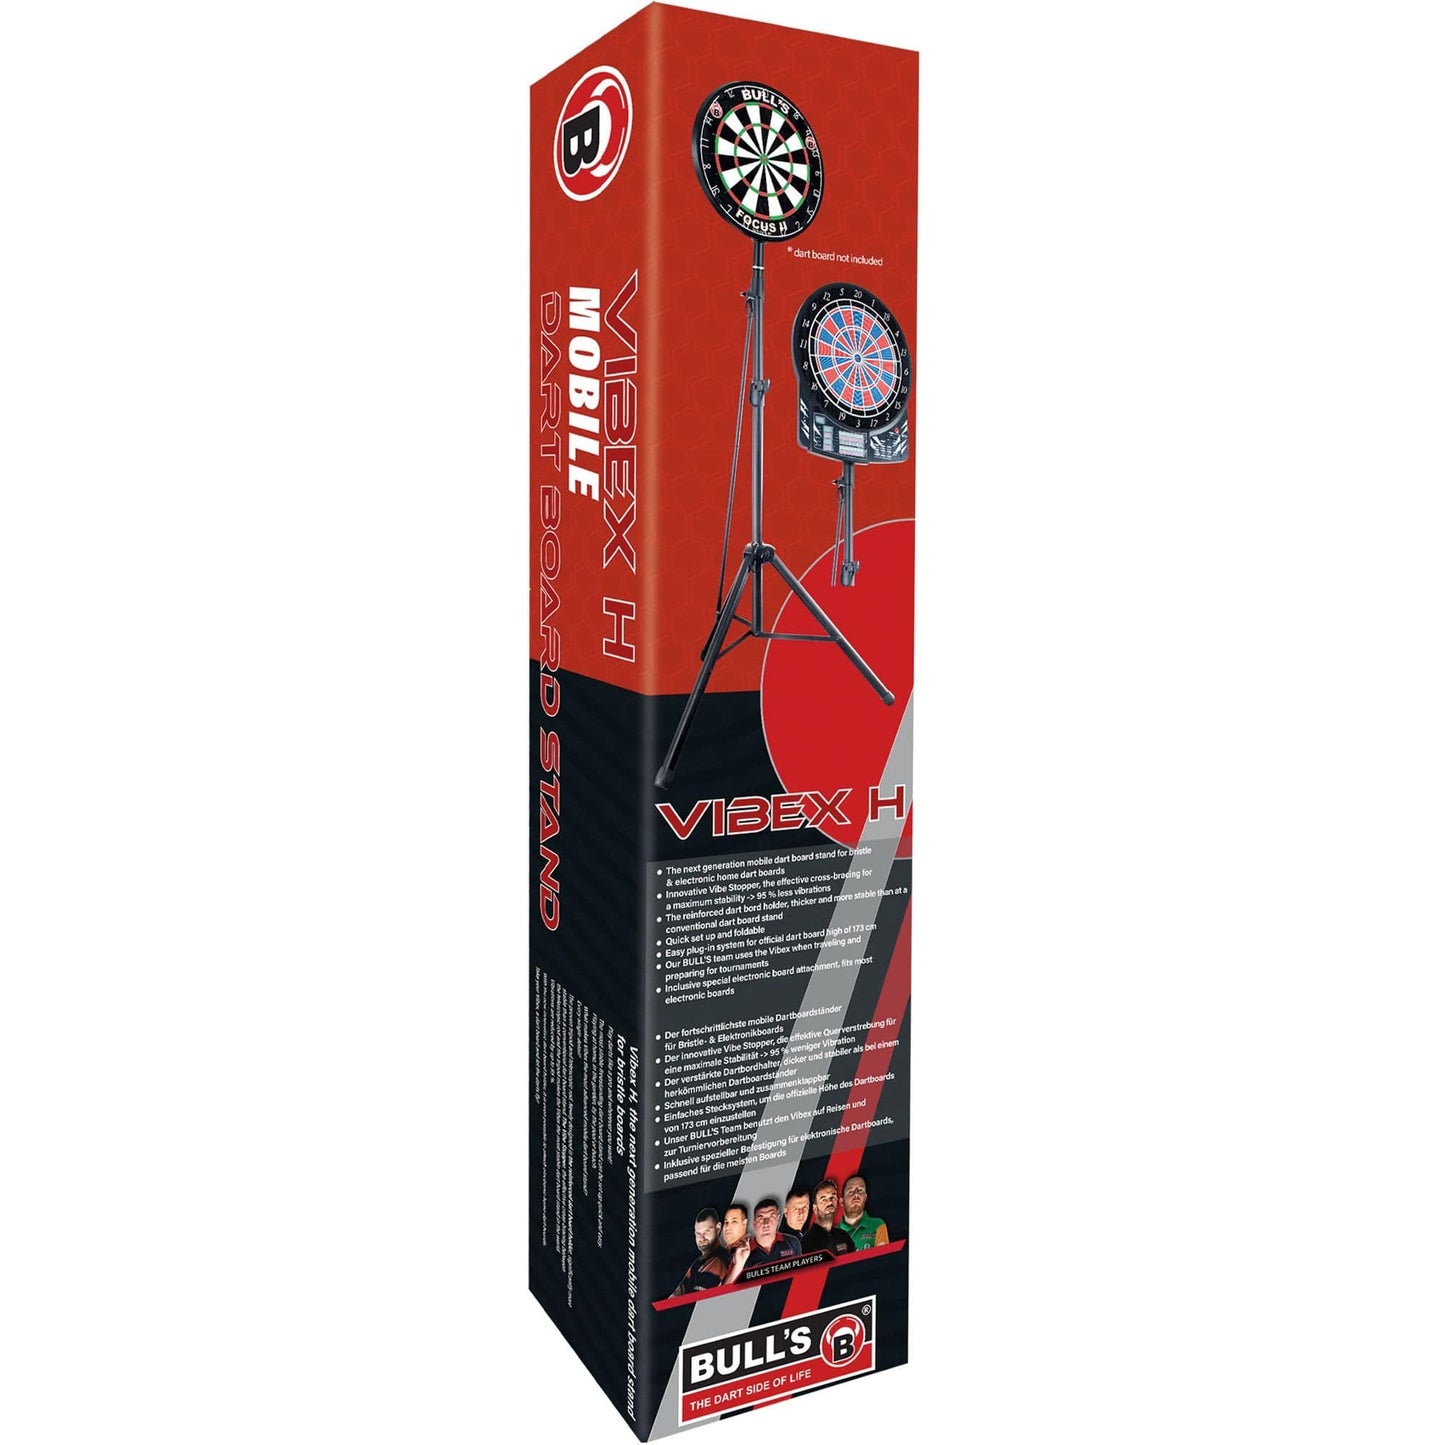 BULL'S Vibex H Mobile Dartstand - Mobile Travel Stand For Soft Tip Dartboards